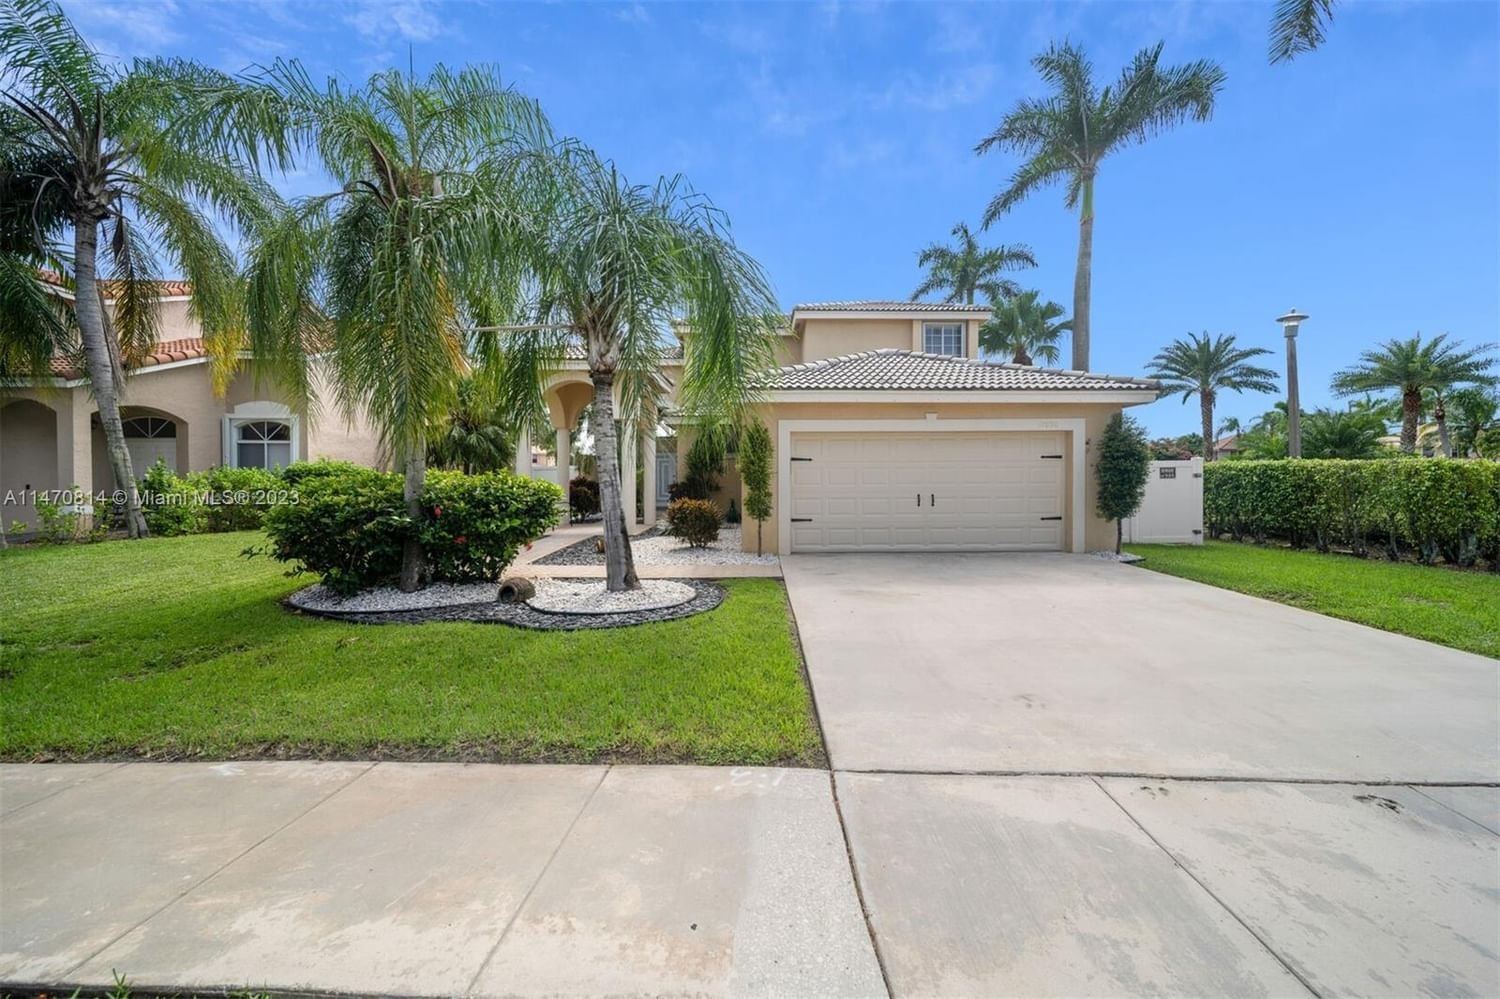 Real estate property located at 17890 3rd St, Broward County, Pembroke Pines, FL